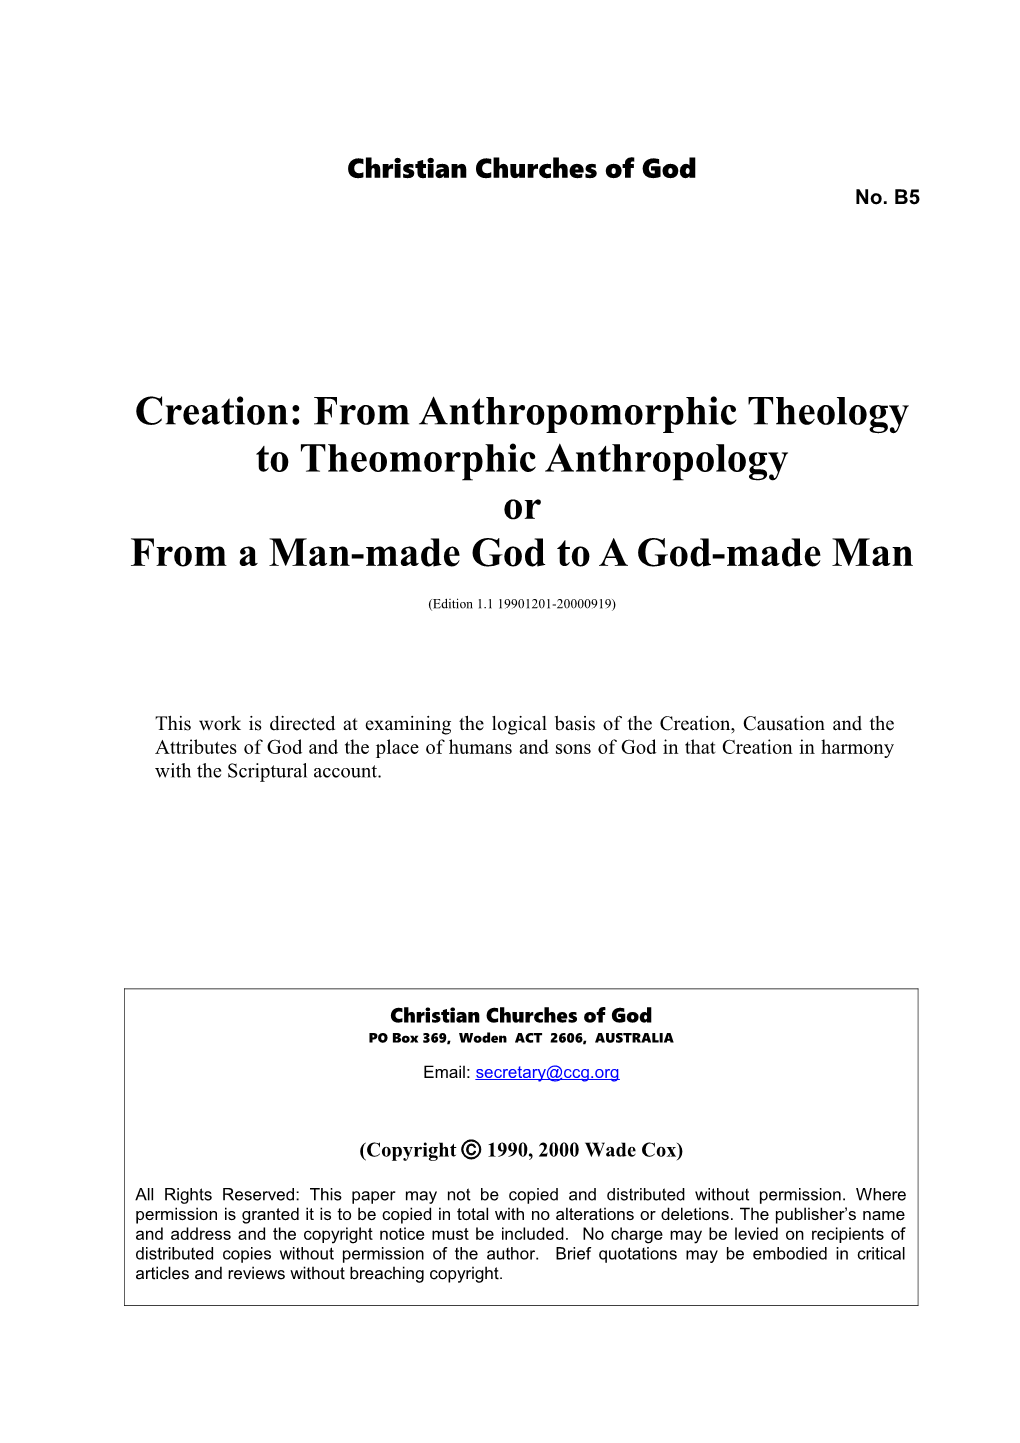 Creation: from Anthropomorphic Theology to Theomorphic Anthropology (No. B5)